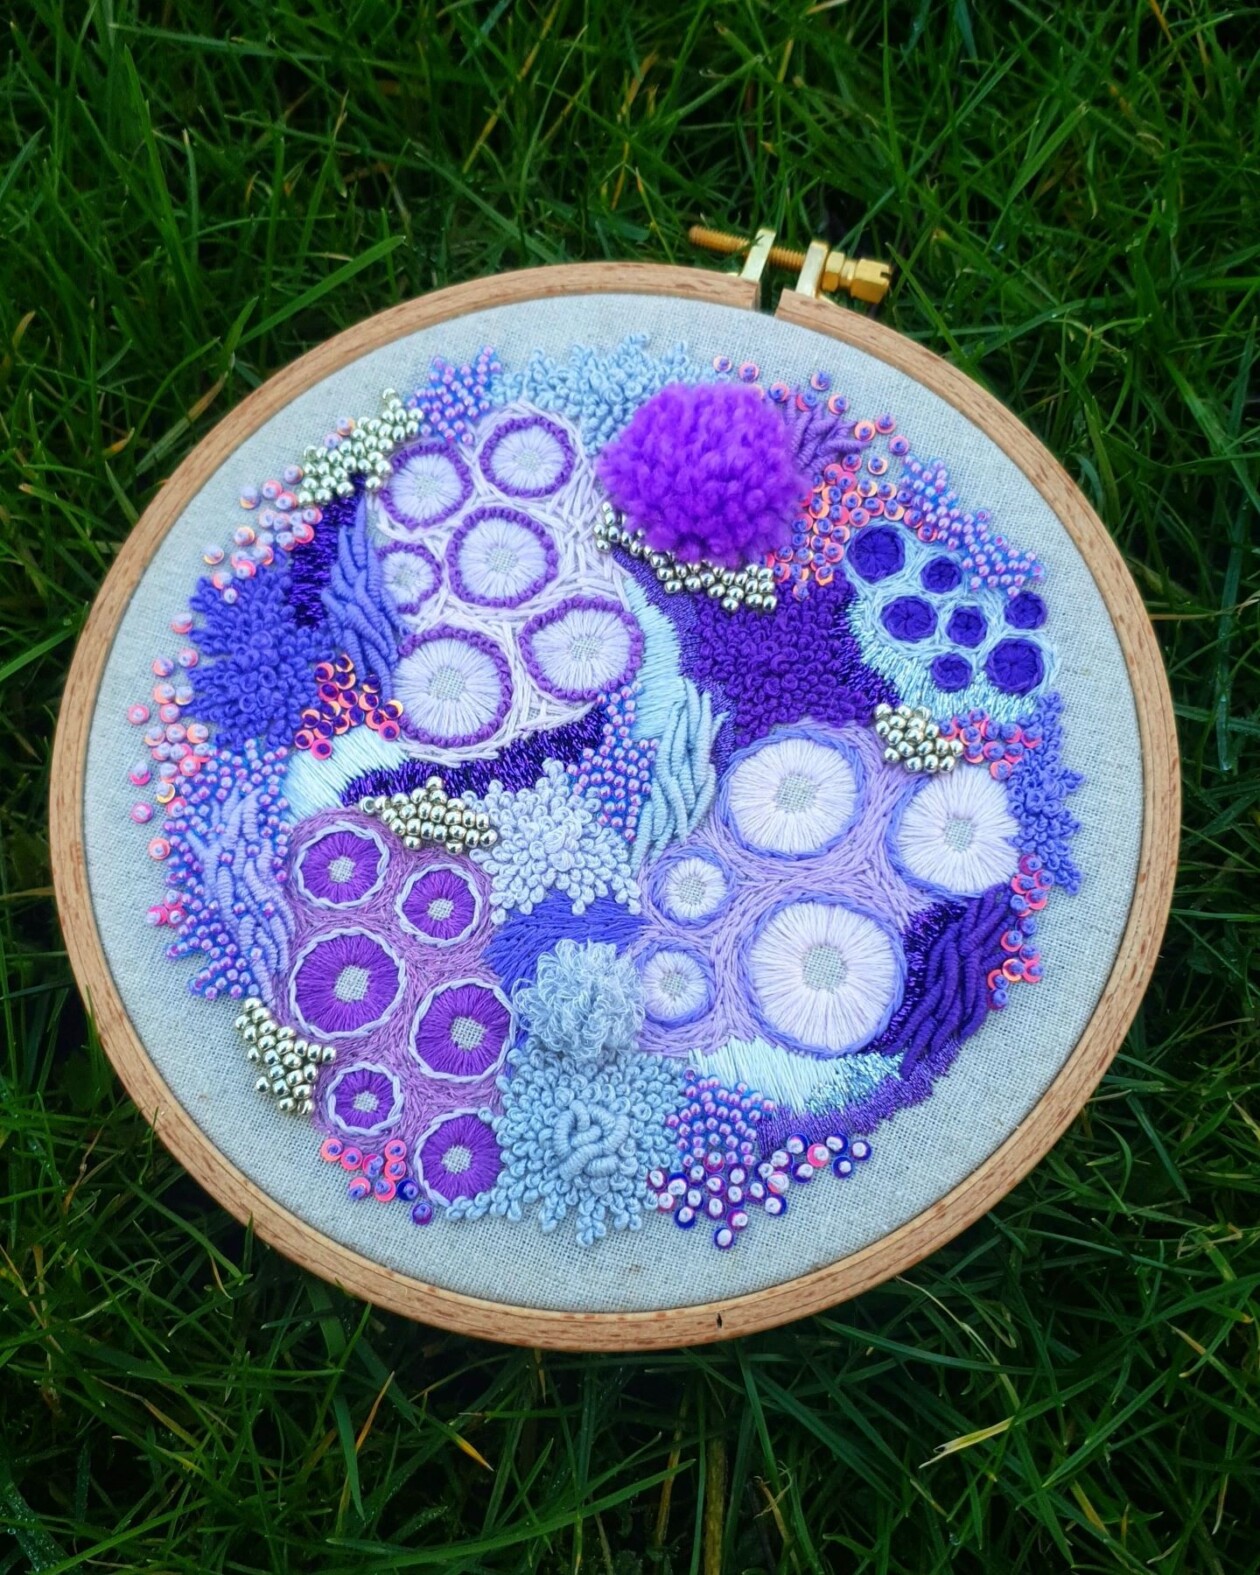 Marvelous Embroideries Inspired By Moss, Coral, And Lichen Forms By Hannah Kwasnycia (15)